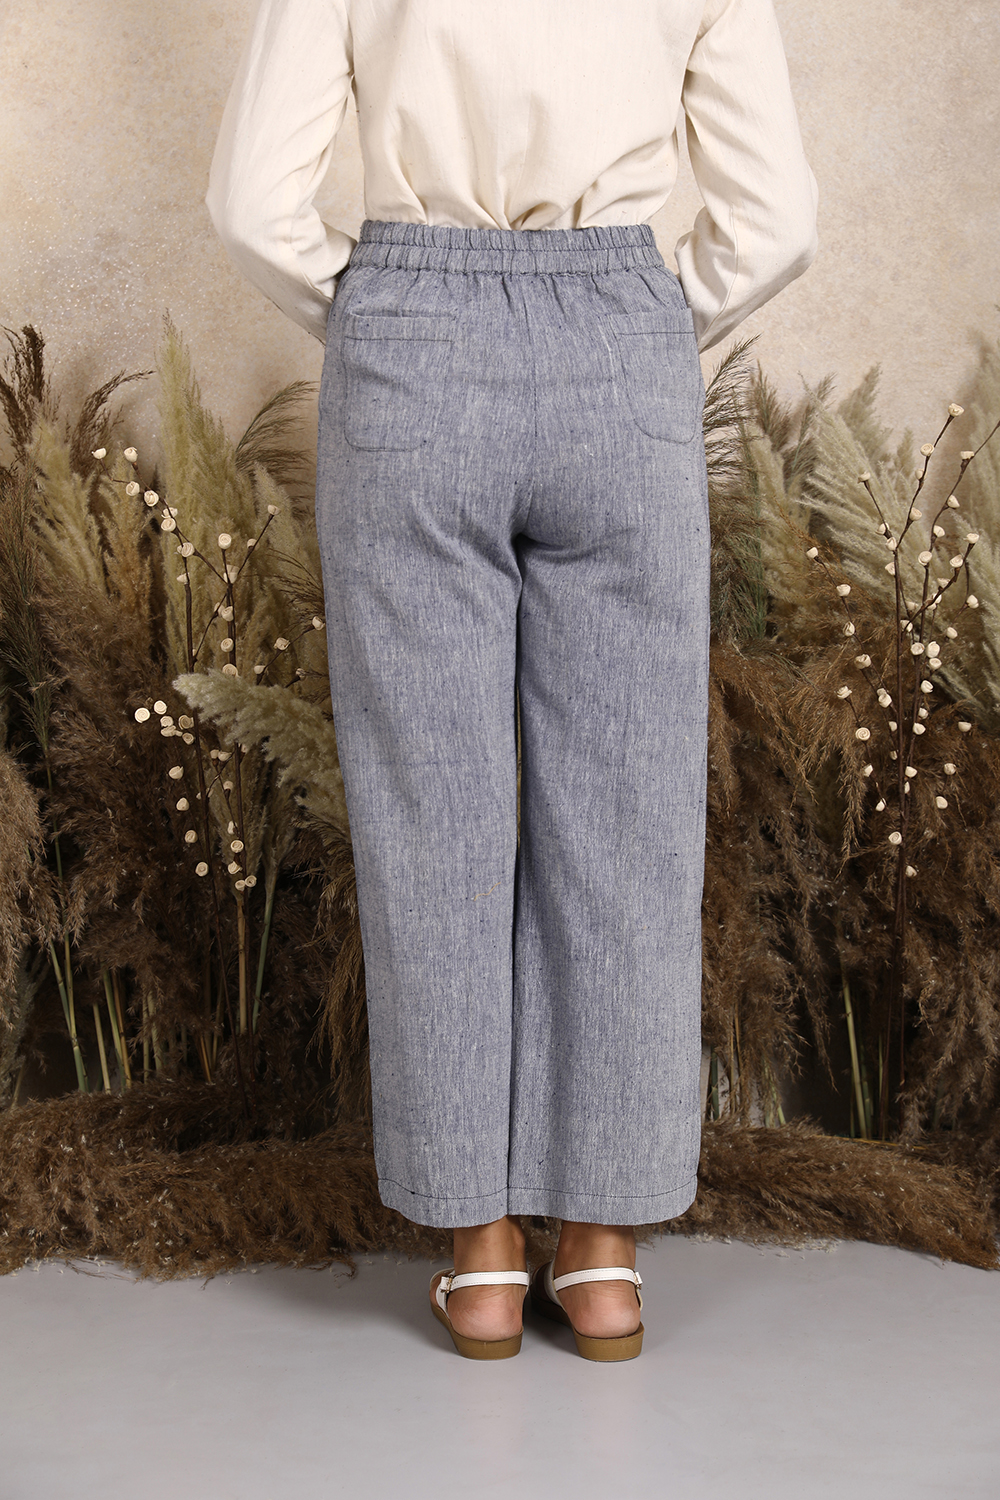 Handwoven Kala Cotton Tie-up Waist Wideleg Pants in Blue Chambray by Lake Peace. Women's sustainable ankle length pants with elasticated waist.